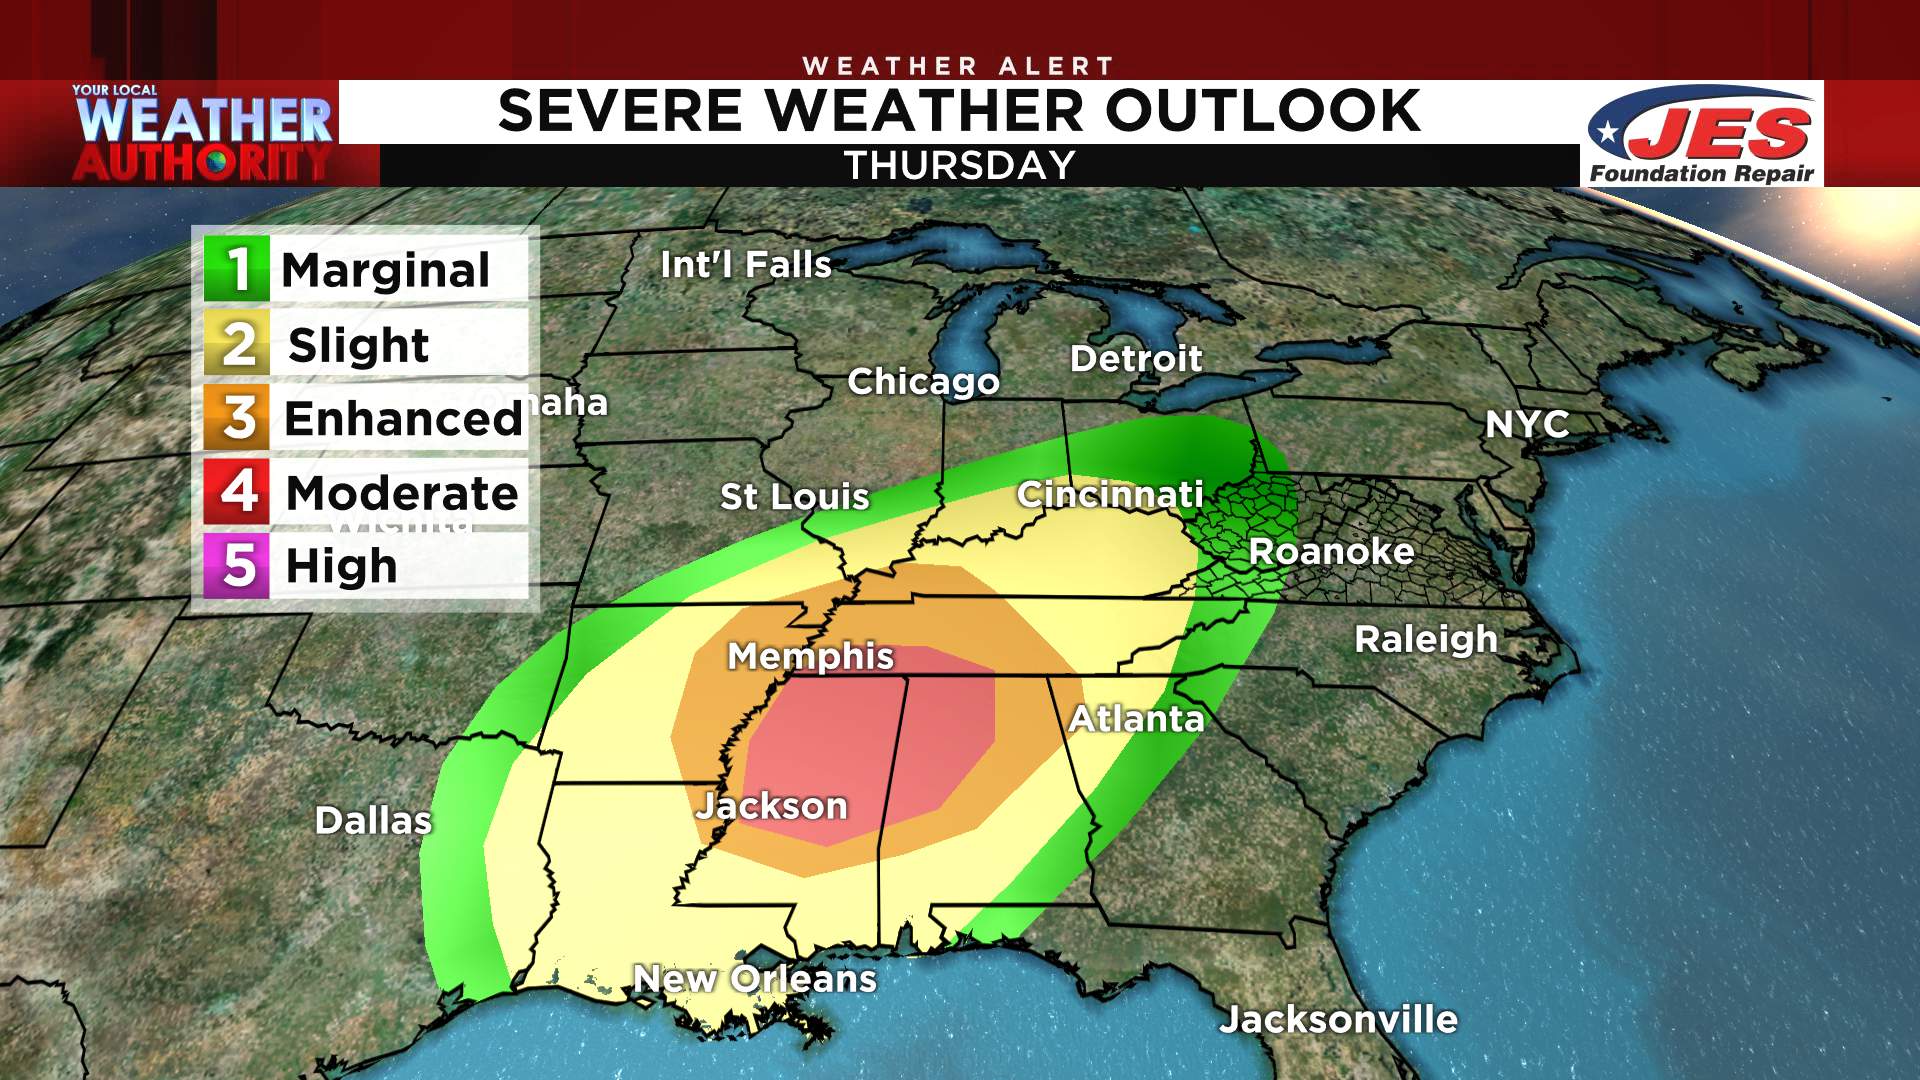 Deep South severe outbreak Thursday; near-record warmth locally Friday afternoon